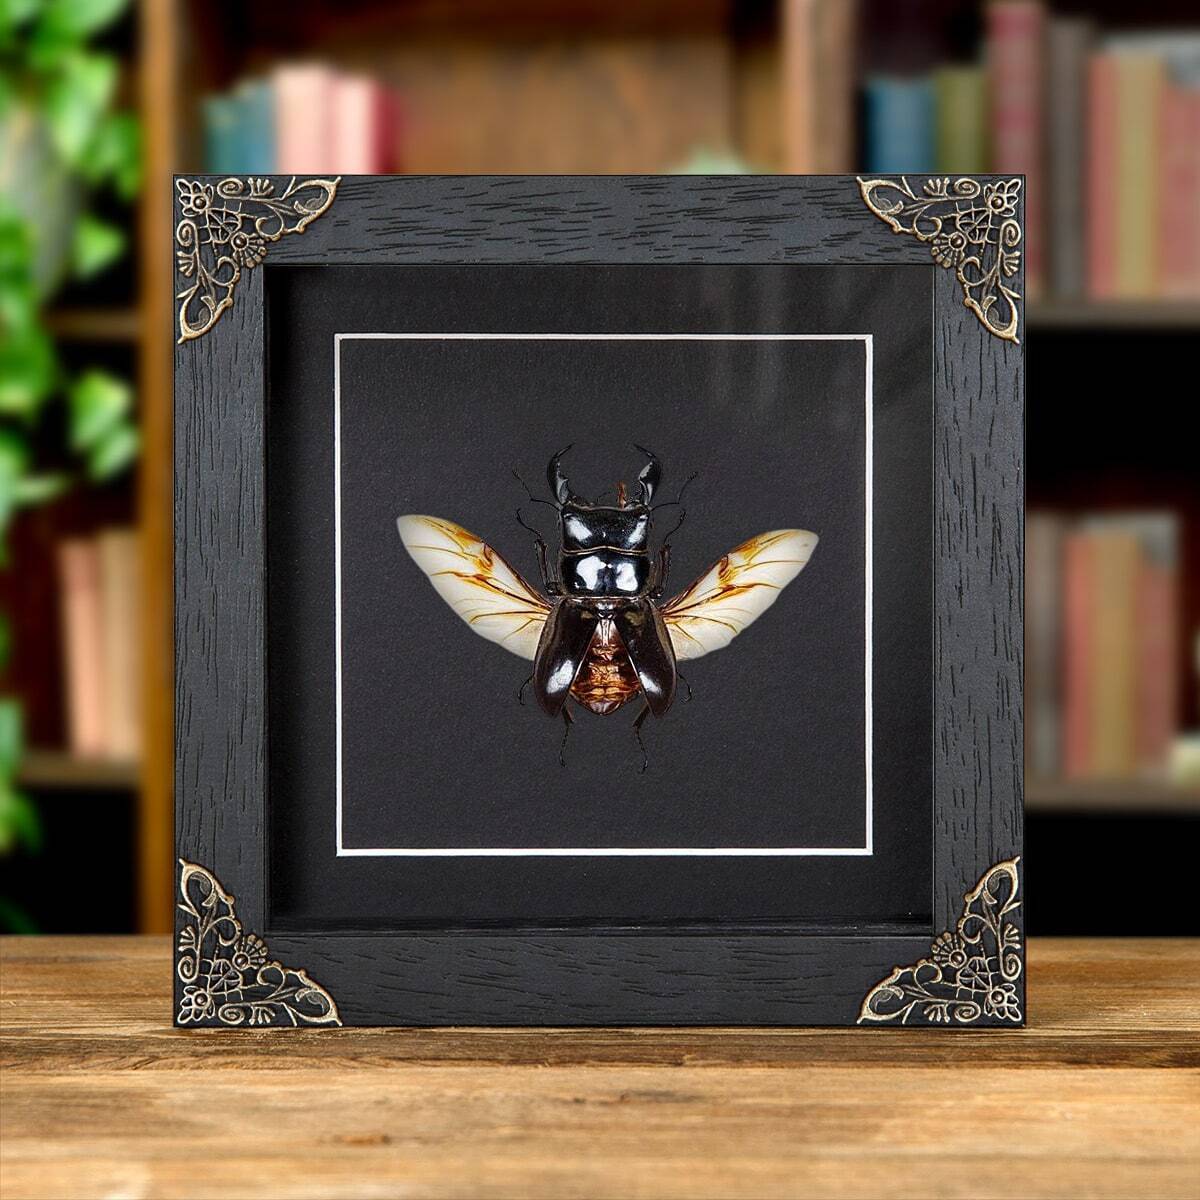 Wing-spread Giant Stag Taxidermy Beetle in Baroque Style Frame (Dorcus titanus)